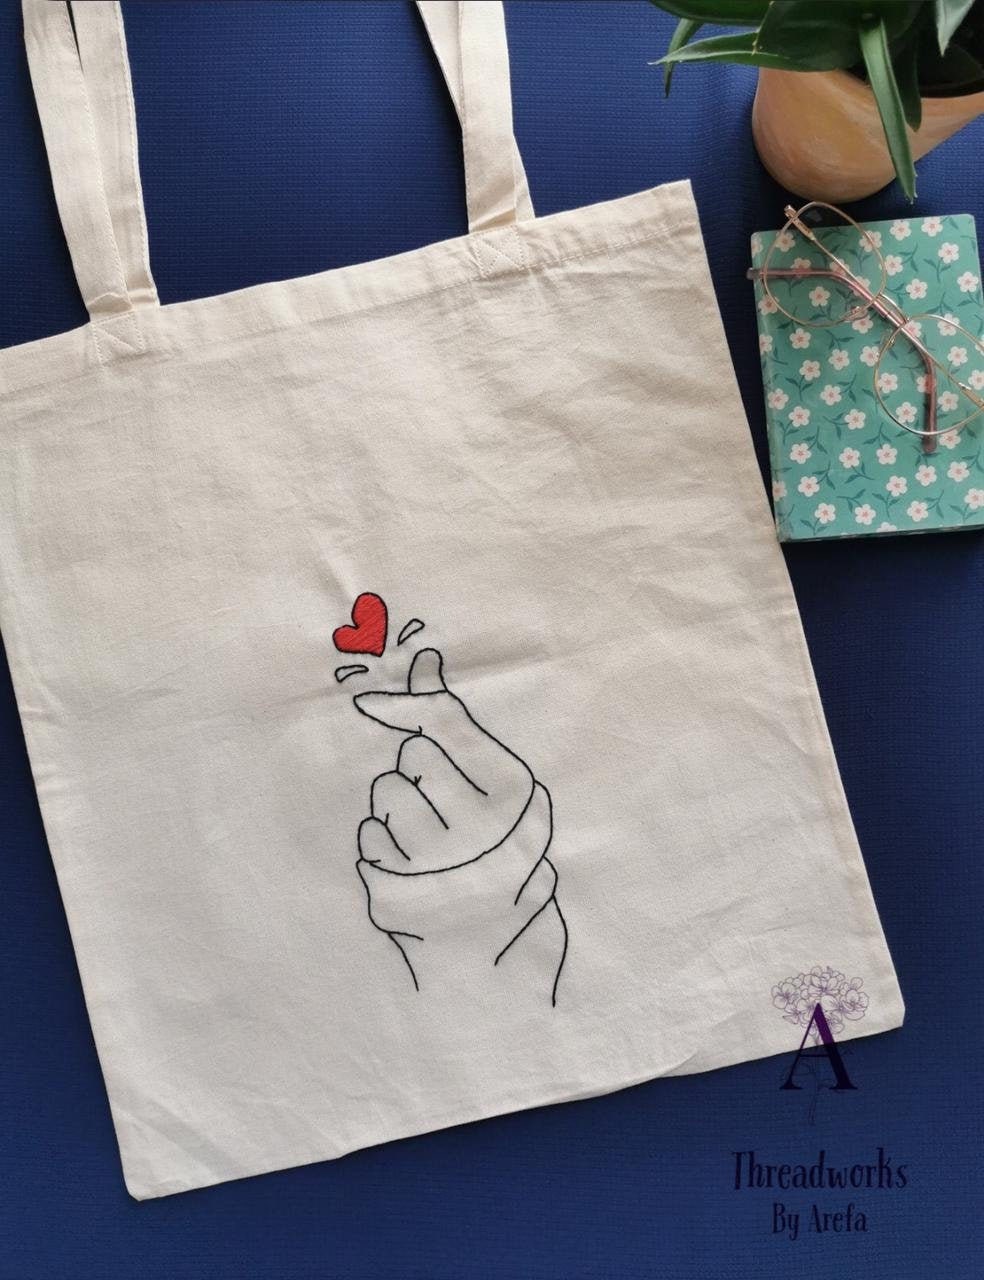 Cotton Canvas DIY tote bags, 2 pcs per set size 30x20x10cm, printed easy  DIY hand embroidery hand bags HP fans gifts Tote bag x 2